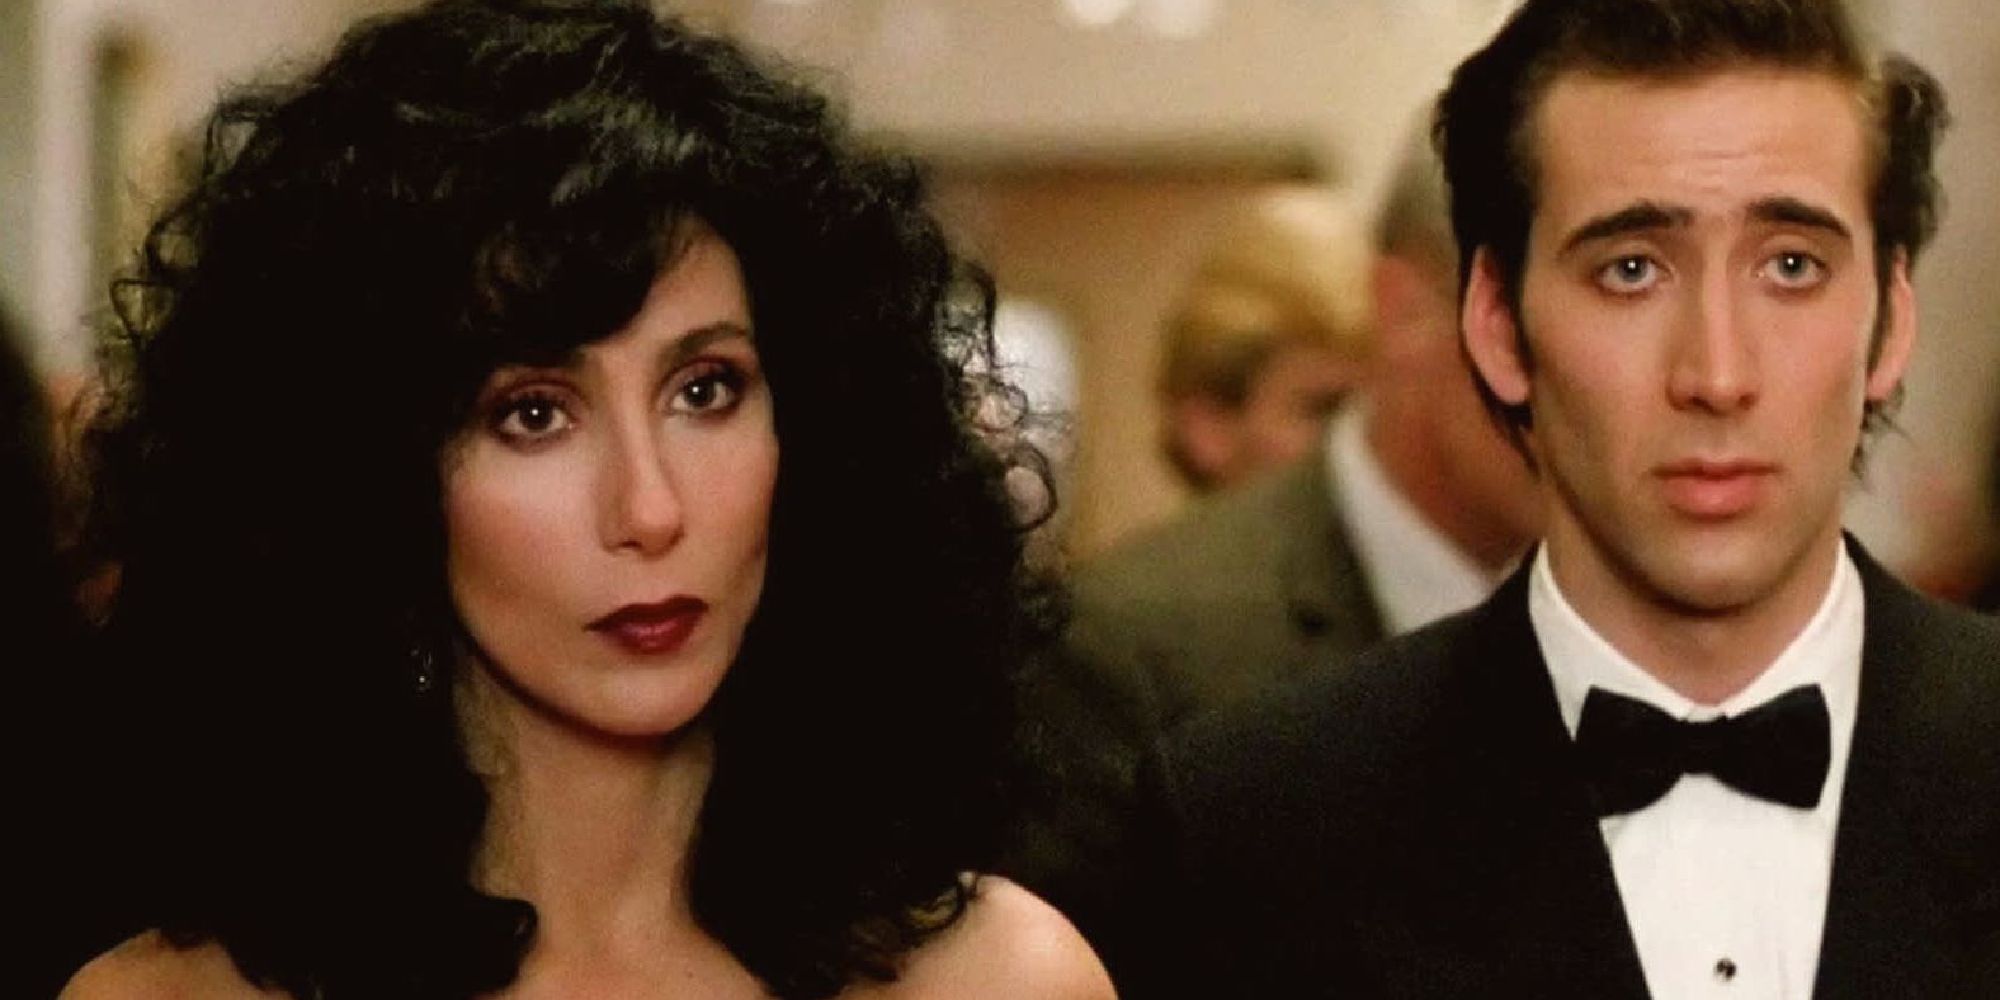 Cher and Nicholas Cage standing next to each other in Moonstruck